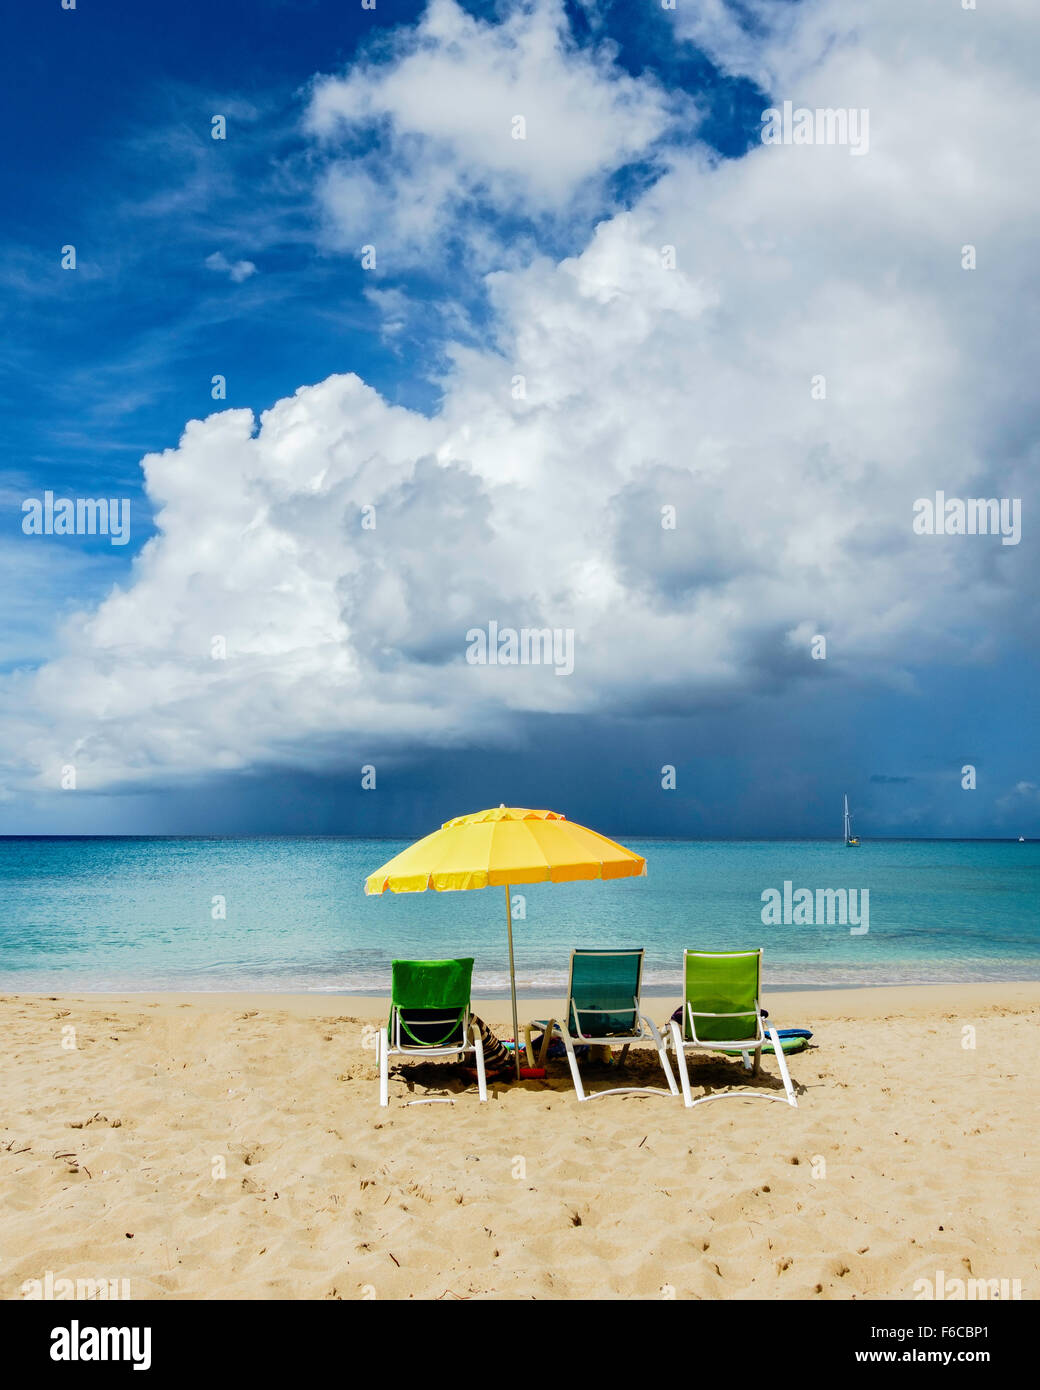 Three beach chairs under a yellow umbrella look out on a tropical storm over the Caribbean sea. St. Croix, U.S. Virgin Islands. USVI, U.S.V.I. Stock Photo